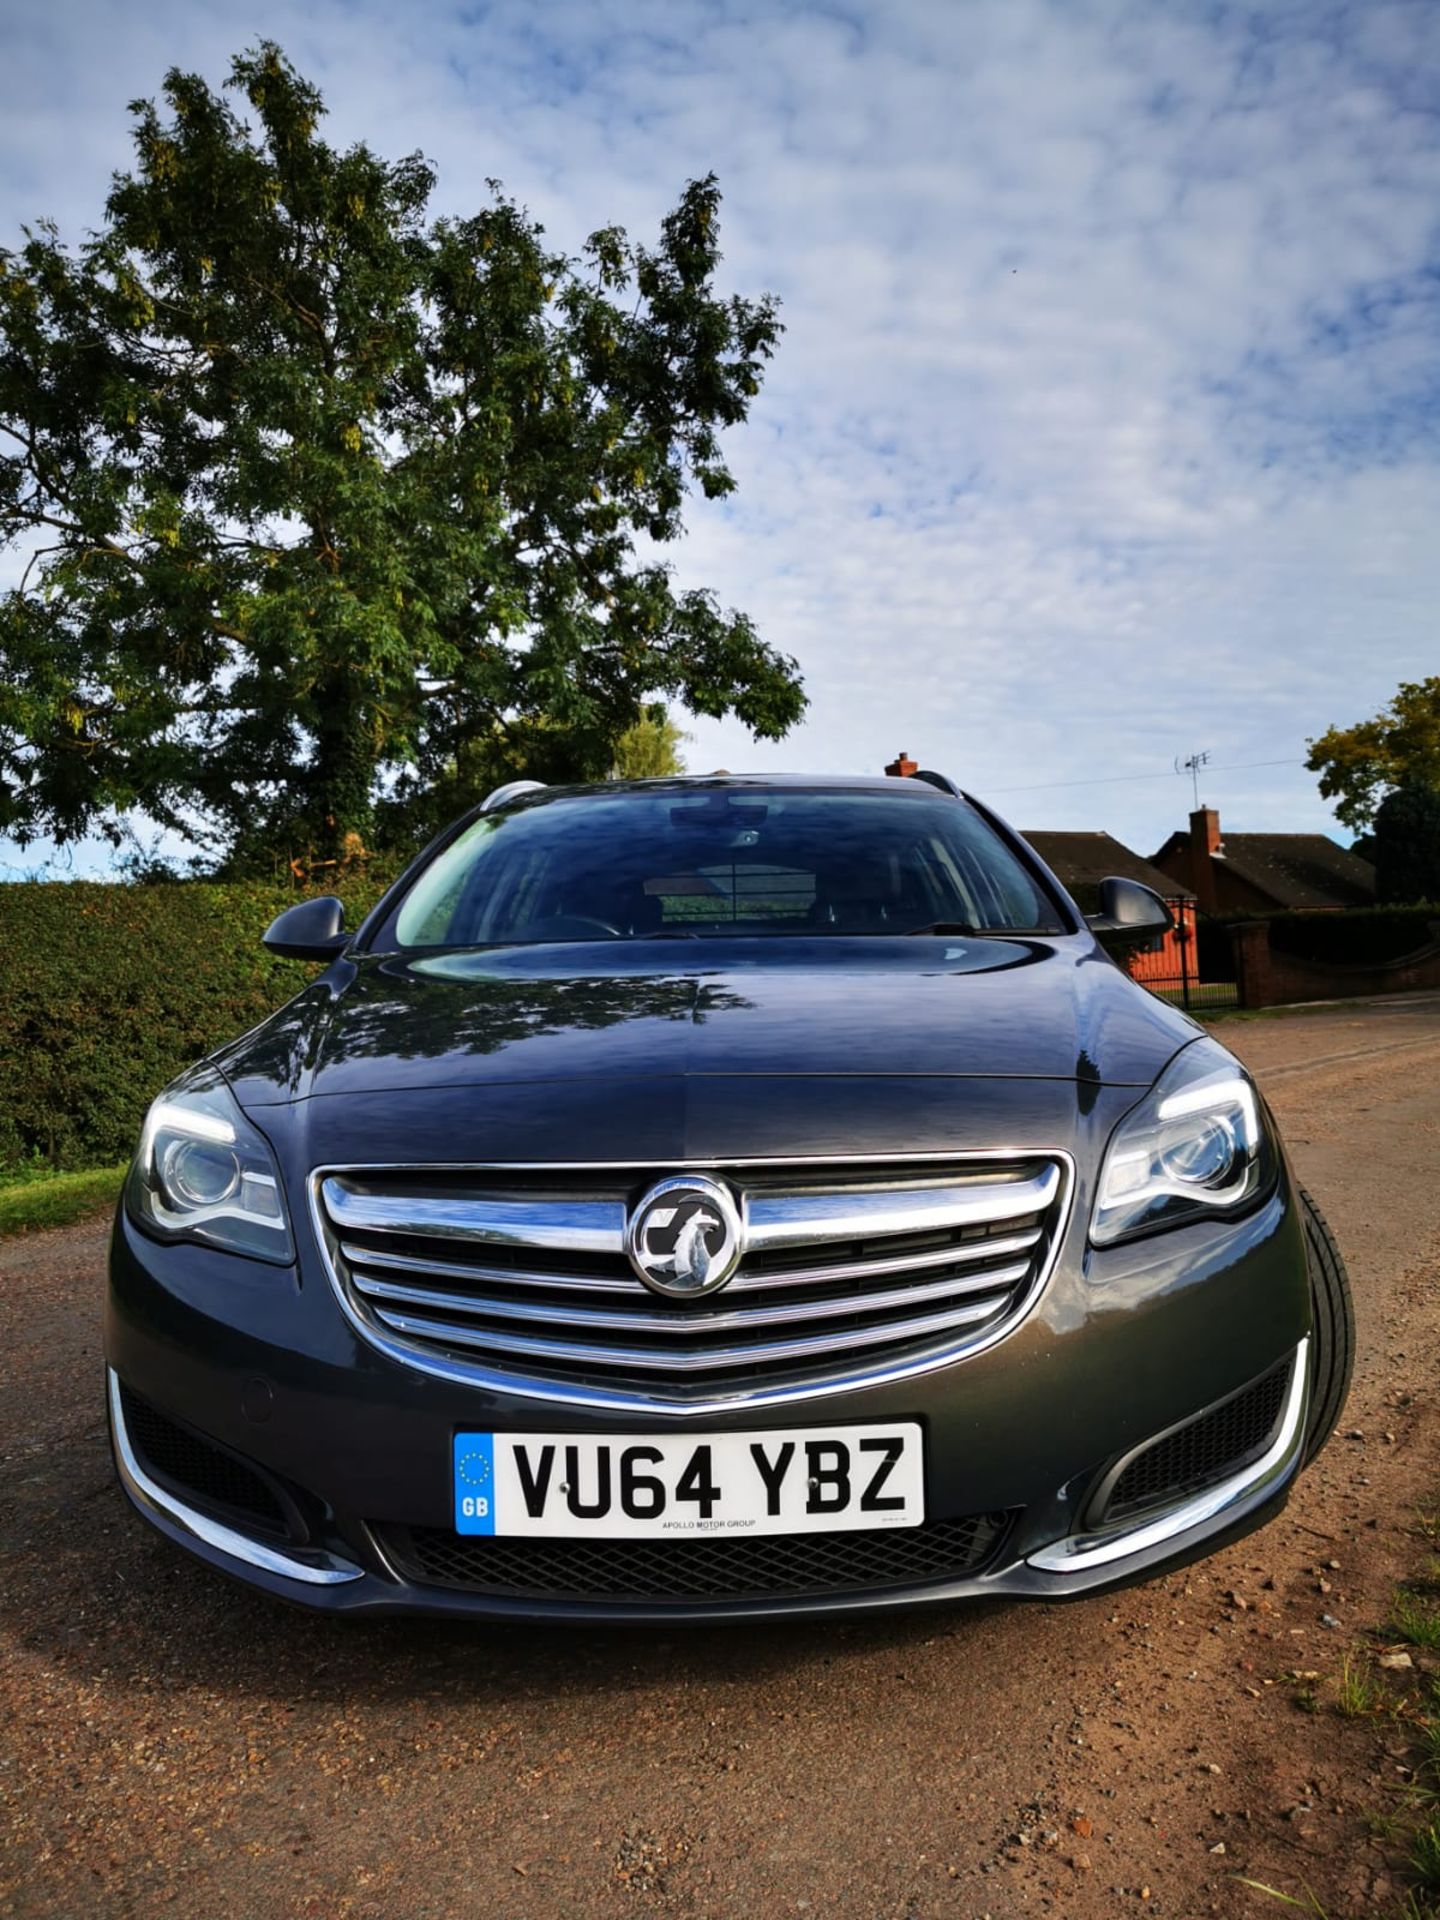 2015/64 REG VAUXHALL INSIGNIA TECHLINE CDTI ECO S 2.0 DIESEL GREY ESTATE, SHOWING 1 FORMER KEEPER - Image 2 of 25